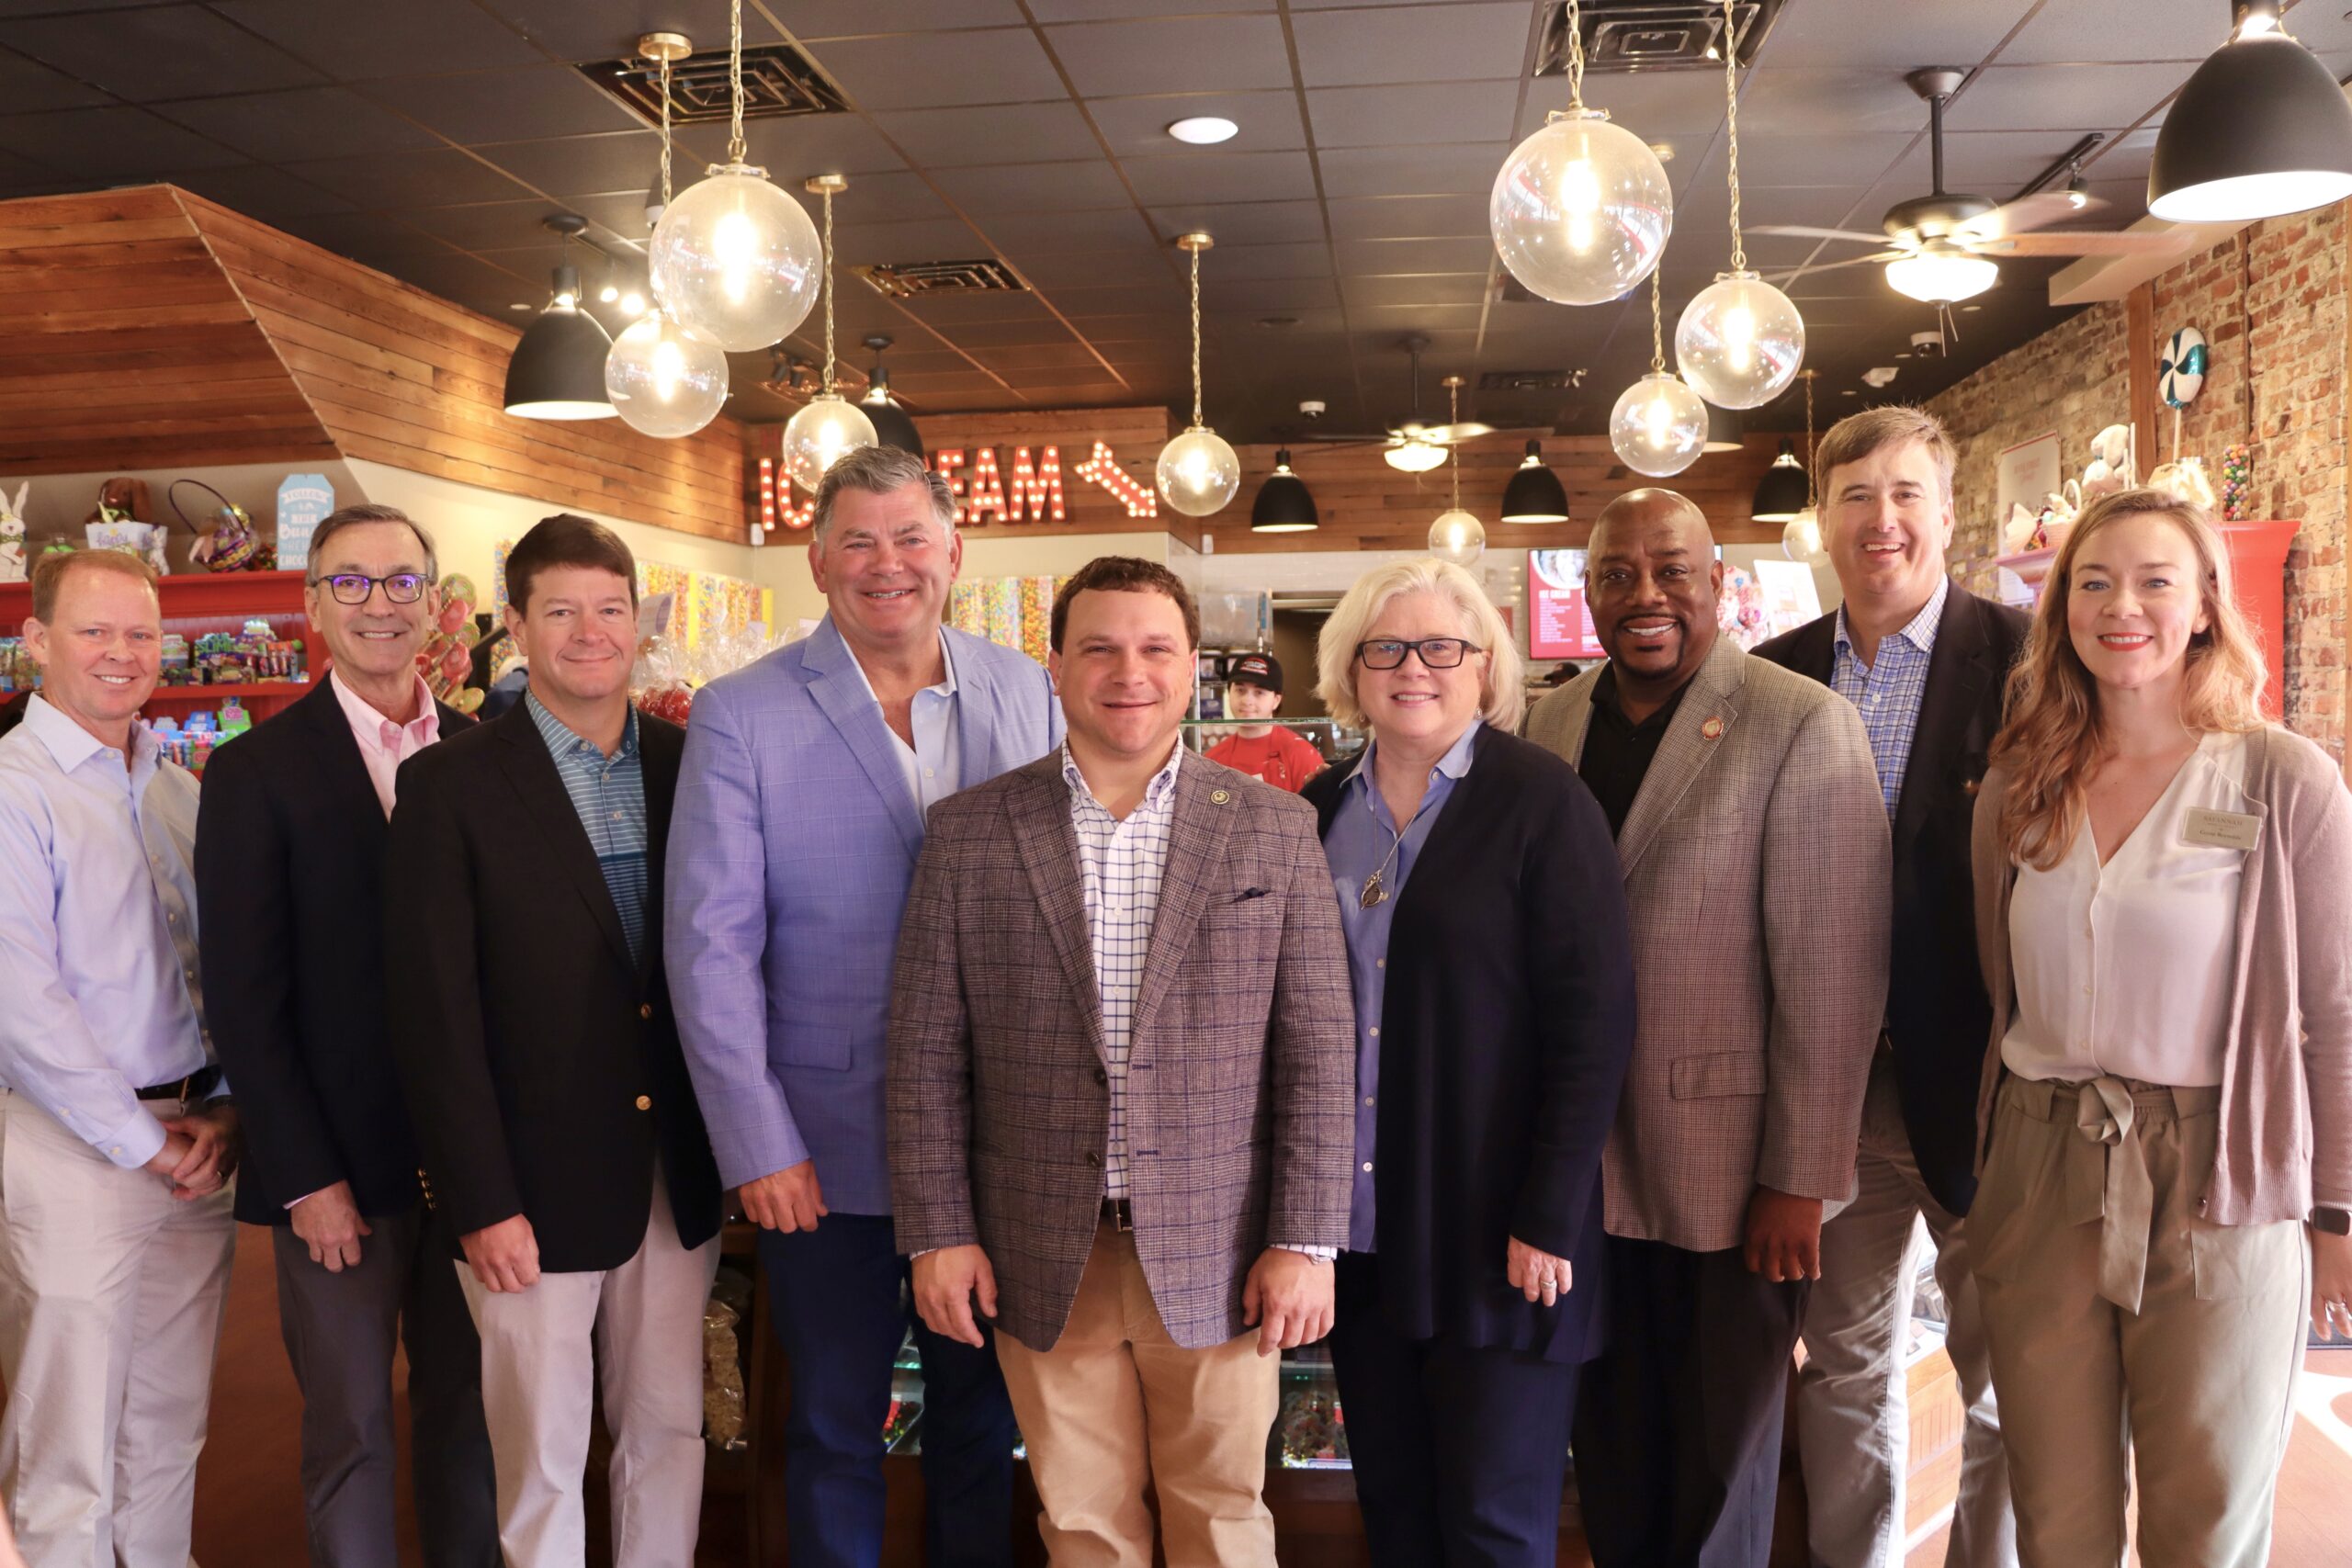 Pictured (L to R): Glen Willard, River Street Sweets • Savannah's Candy Kitchen® Franchise Owner in Pooler, Ga.; Kenny Tarver, co-owner of Mascot Pecan Shelling Co.; Trip Tollison, President & CEO, Savannah Economic Development Authority; Tim Strickland, co-owner of River Street Sweets; Tyler Harper, Commissioner of Agriculture for the State of Georgia; Jennifer Strickland, co-owner of River Street Sweets; Mayor Van Johnson, City of Savannah; Bert Brantley, President & CEO, Savannah Area Chamber of Commerce; and Conni Reynolds, Small Business and Events Manager, Savannah Area Chamber of Commerce